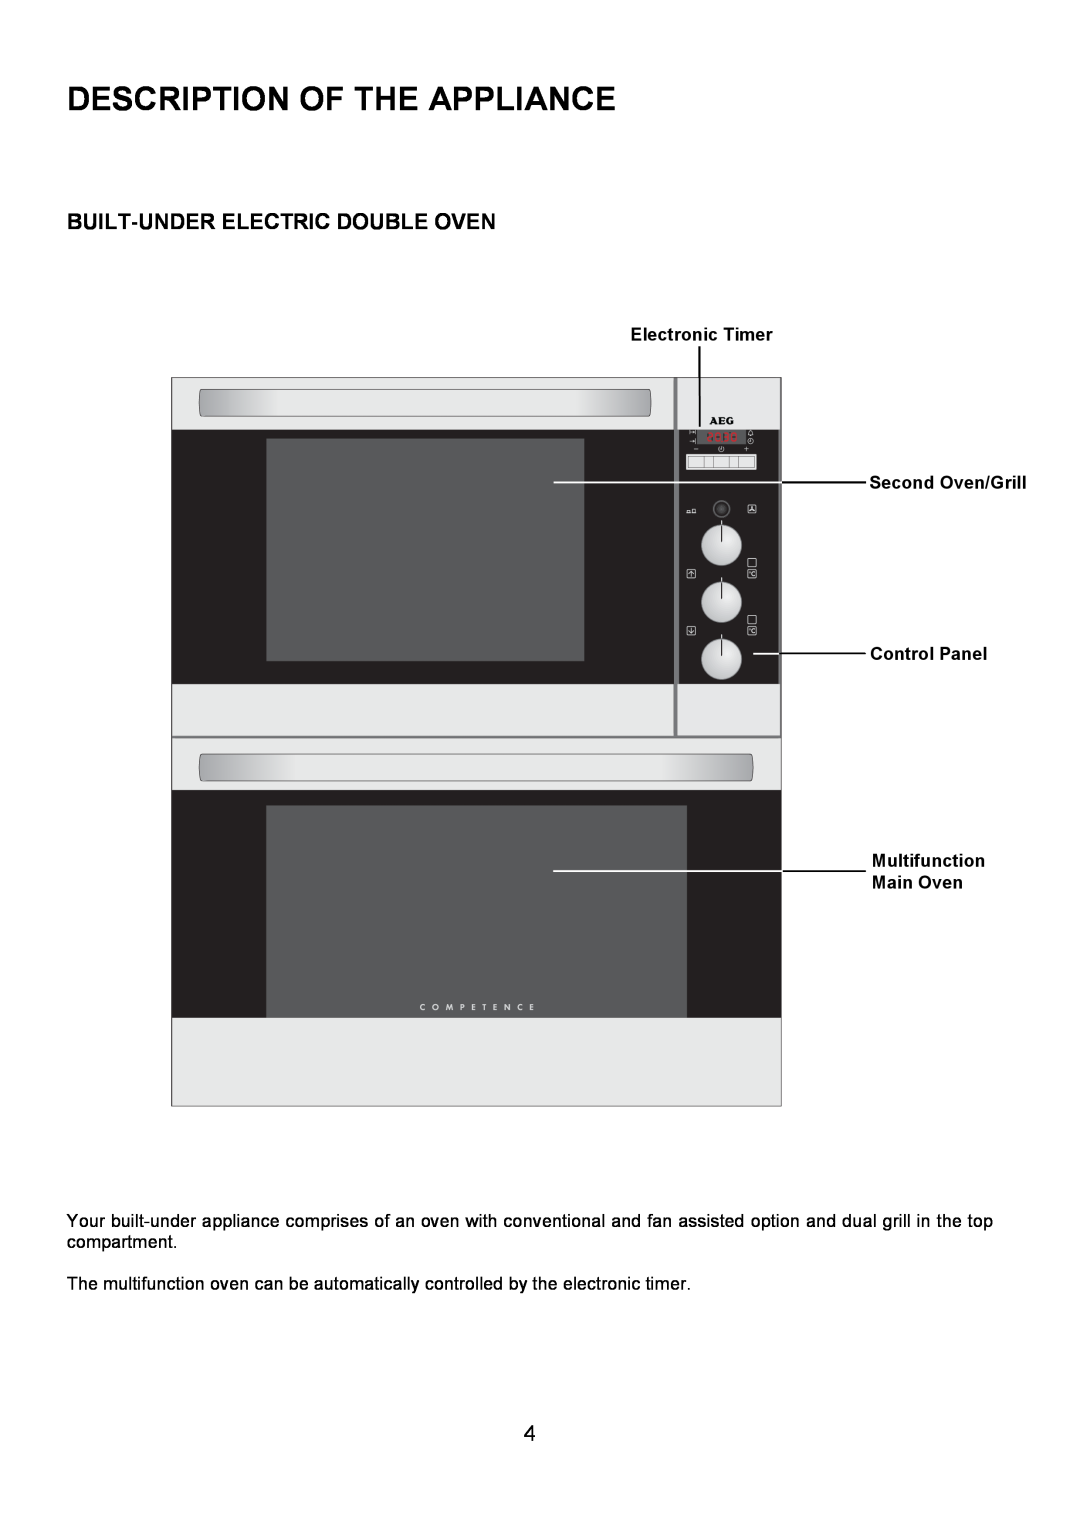 Electrolux U7101-4 operating instructions Description Of The Appliance, Built-Under Electric Double Oven, Main Oven 